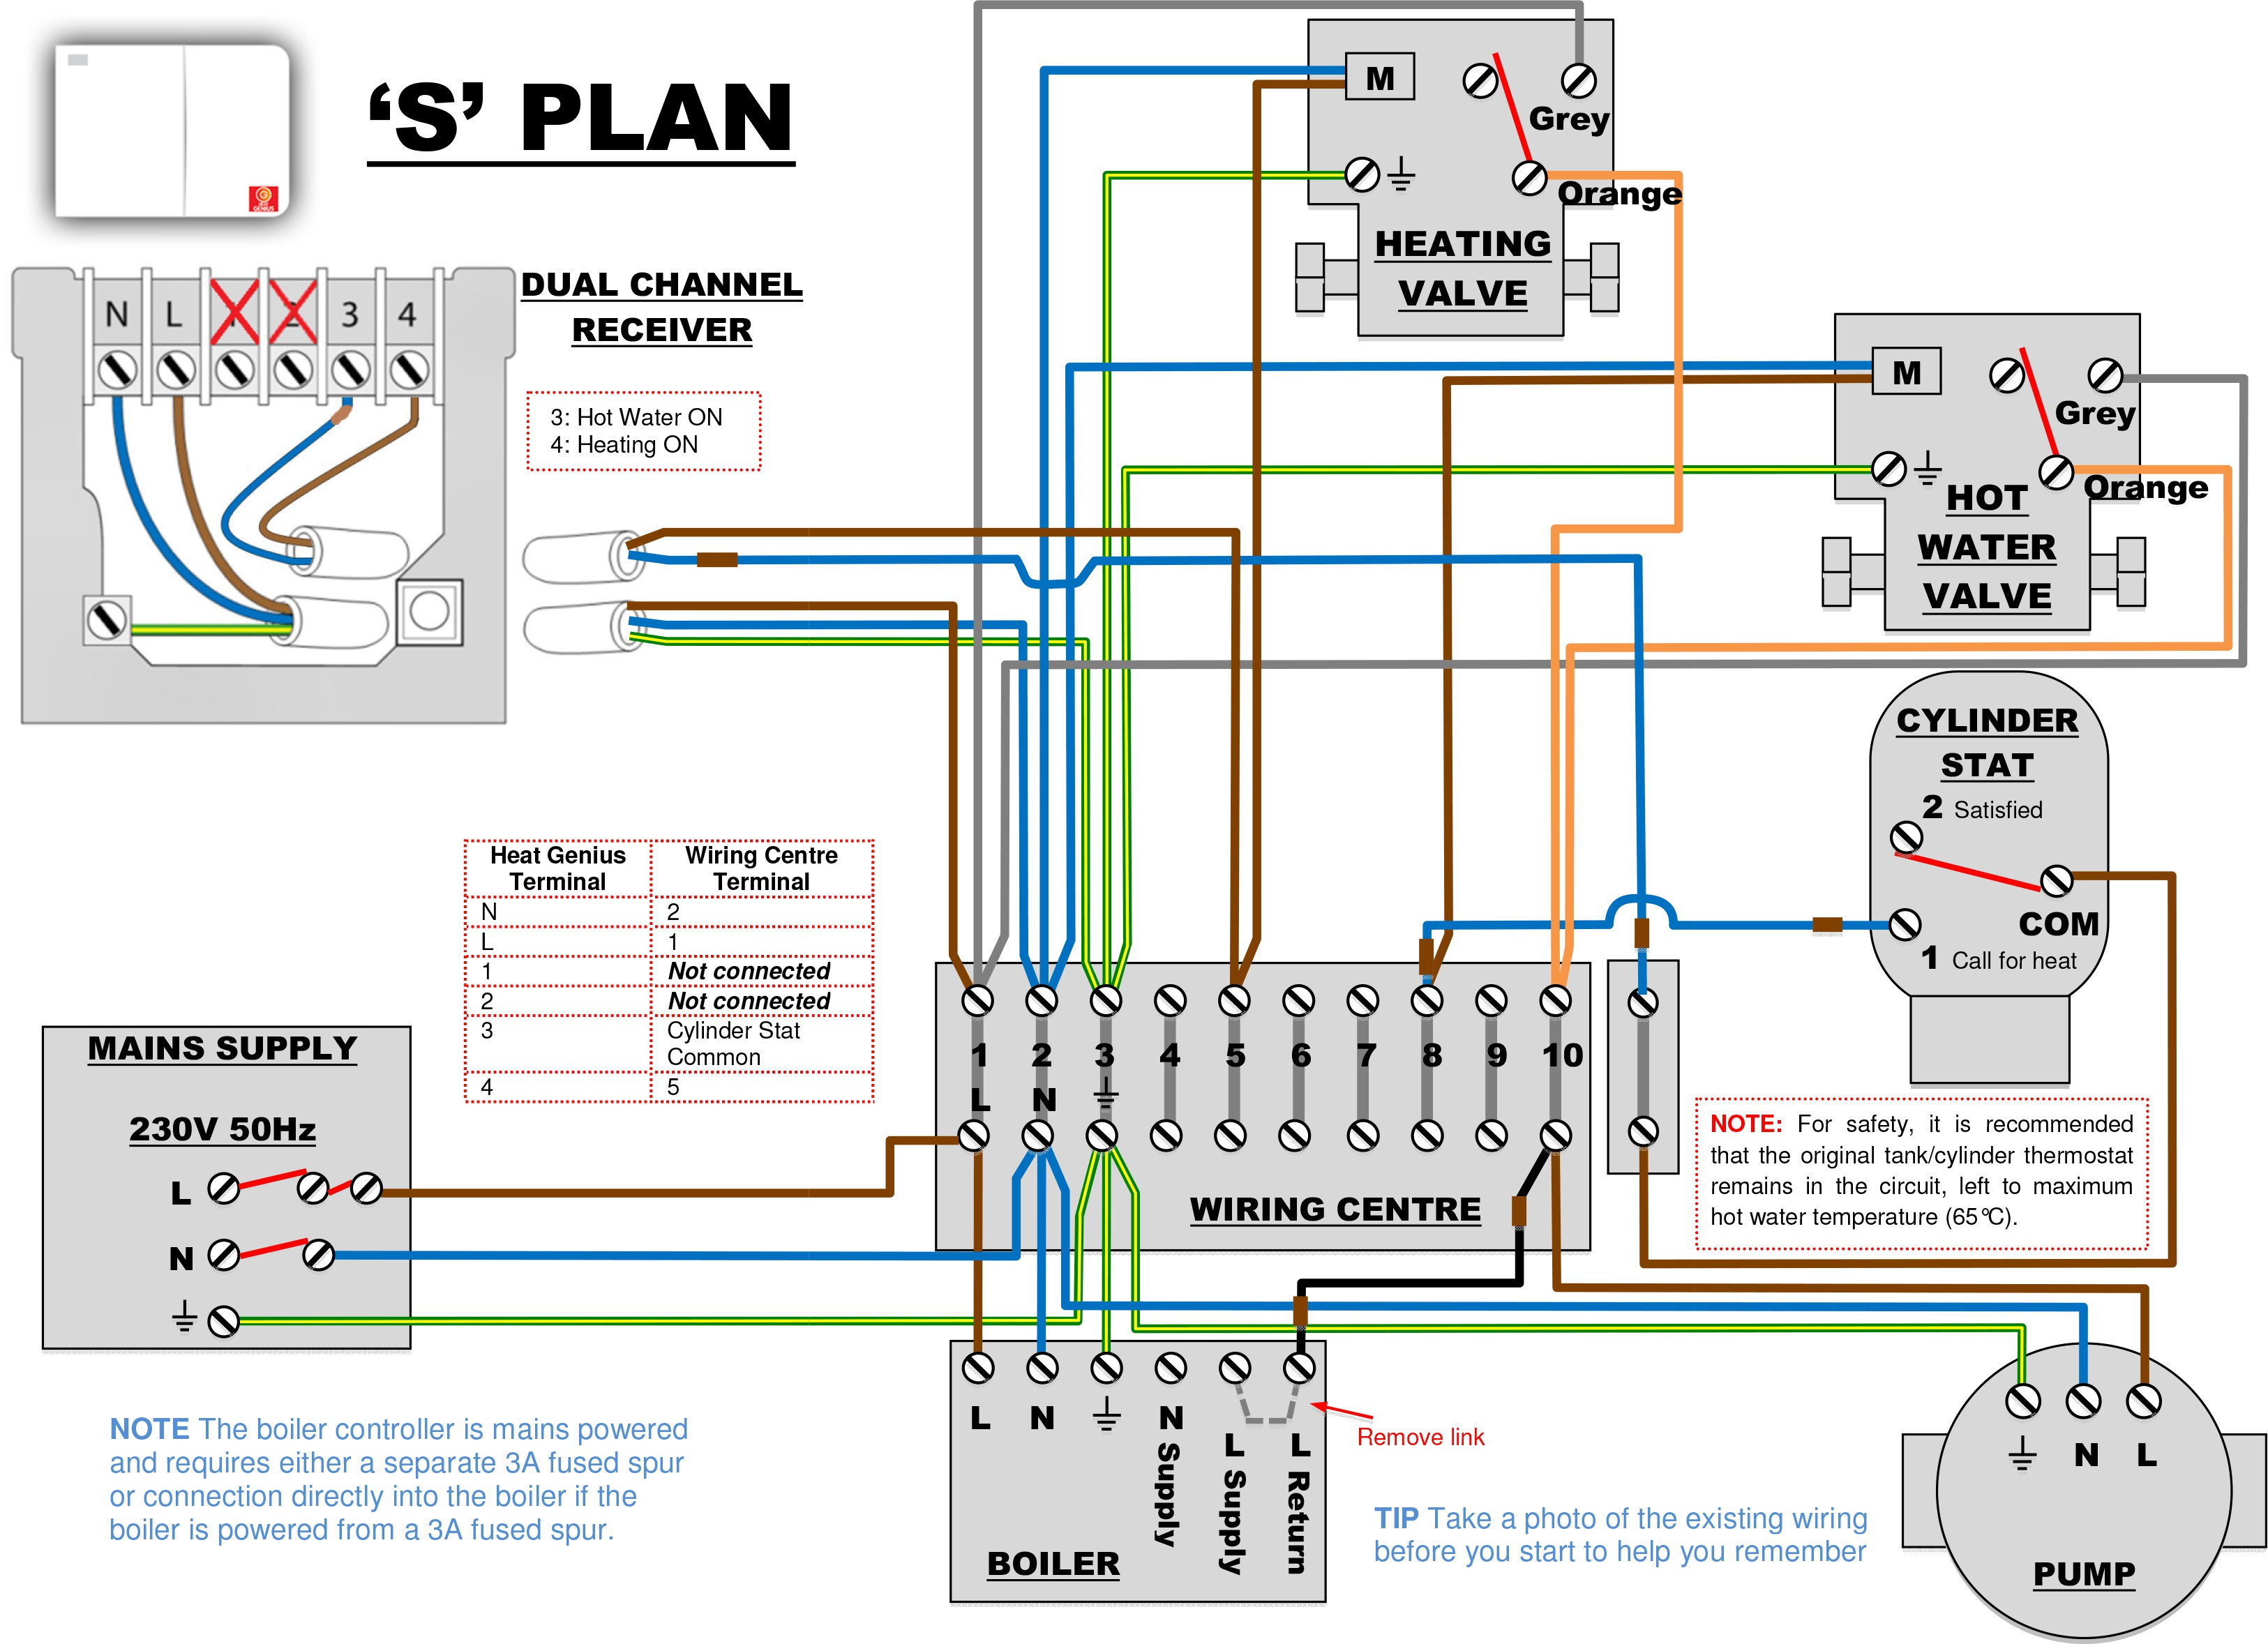 The Nest Wiring Diagram | Manual E-Books - Nest Thermostat Wiring Diagram